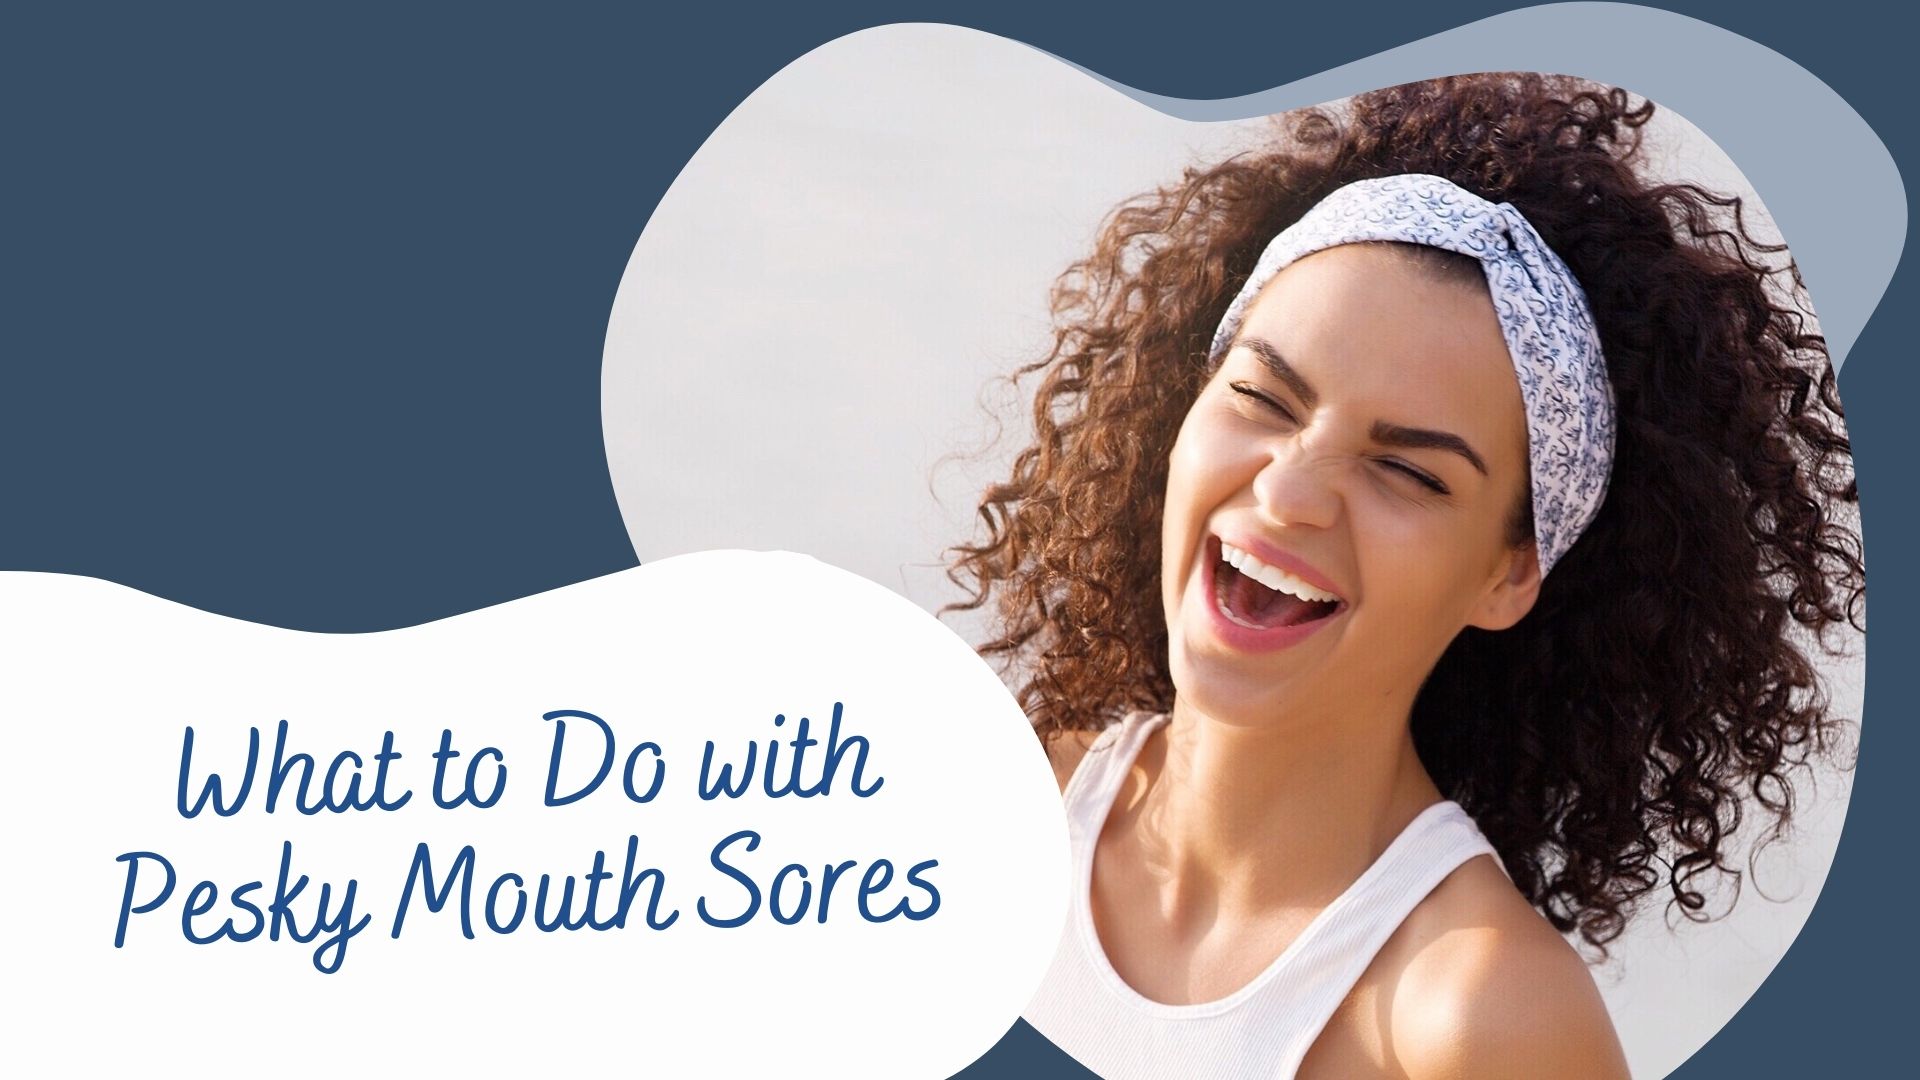 There-are-many-reasons-why-you-may-have-mouth-sores